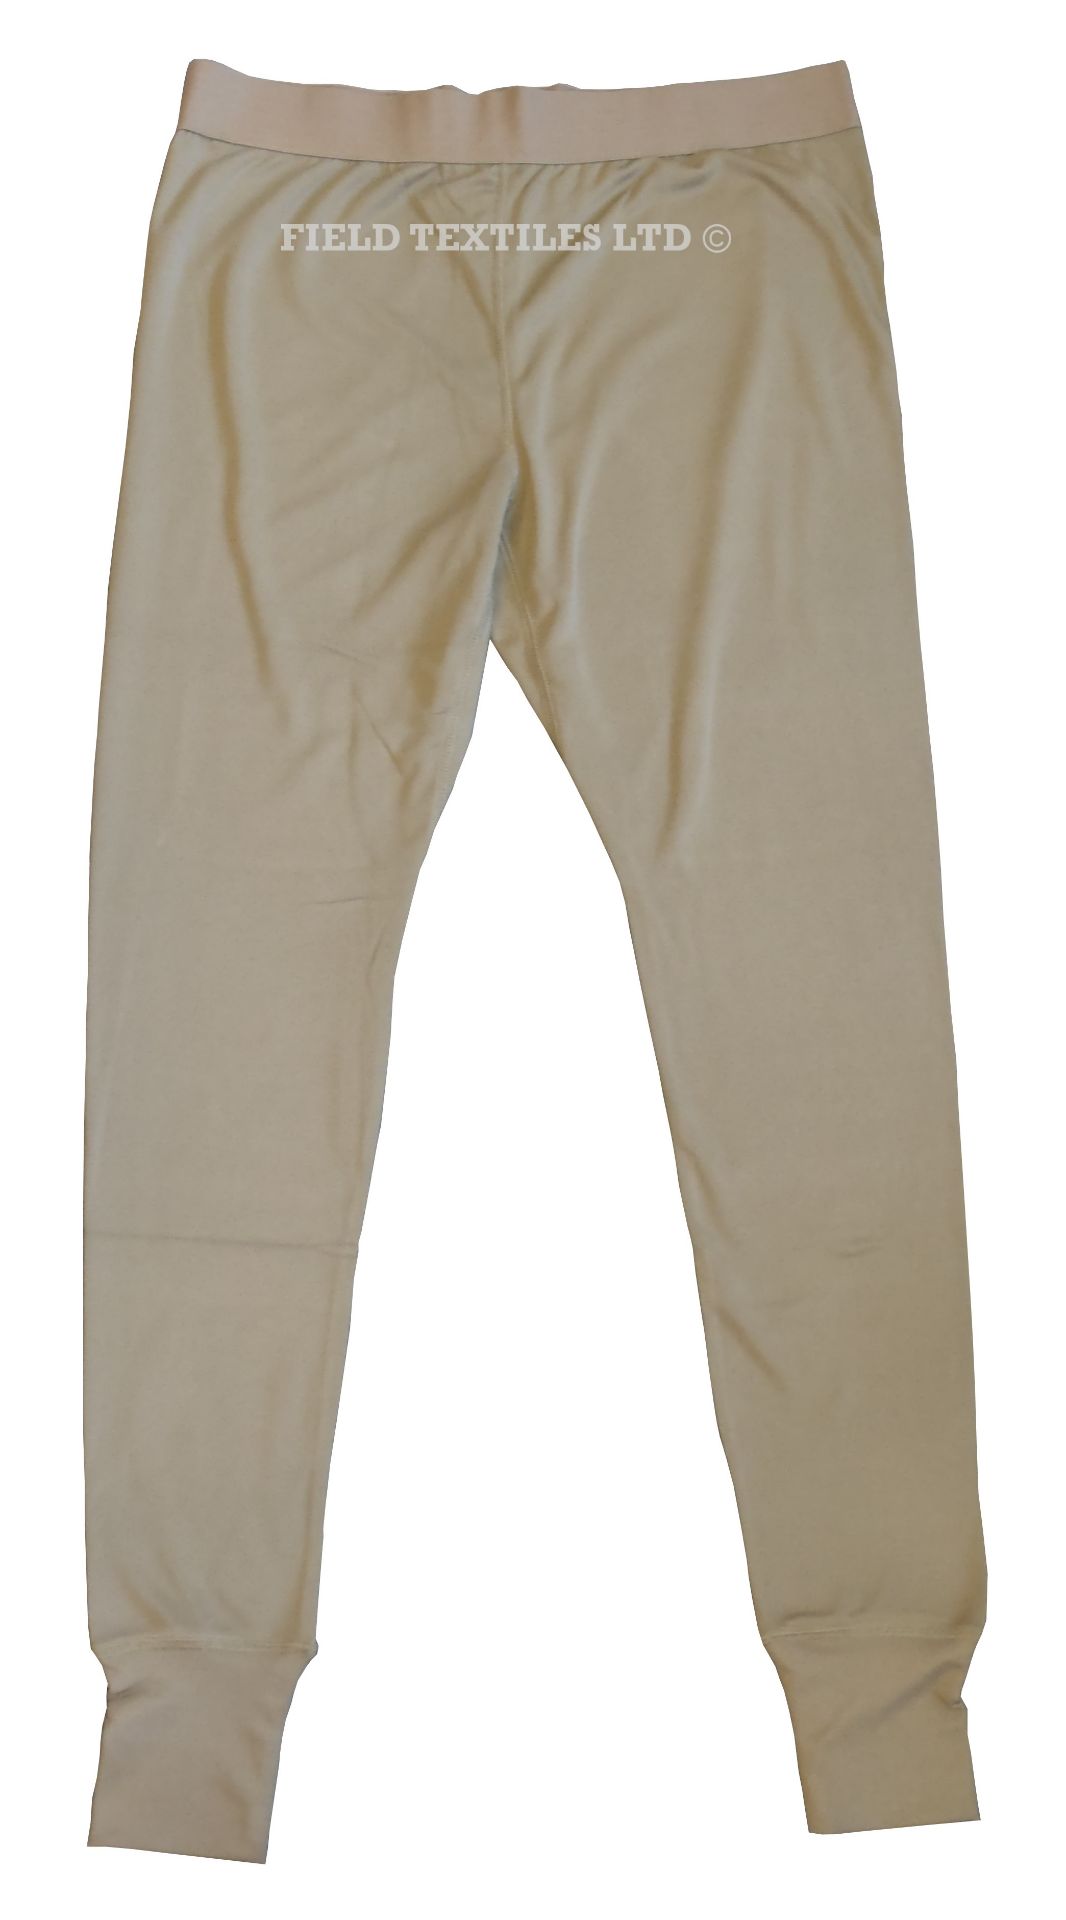 Pack of 10 - Light Olive Long Johns - Mix of Sizes - Grade 1